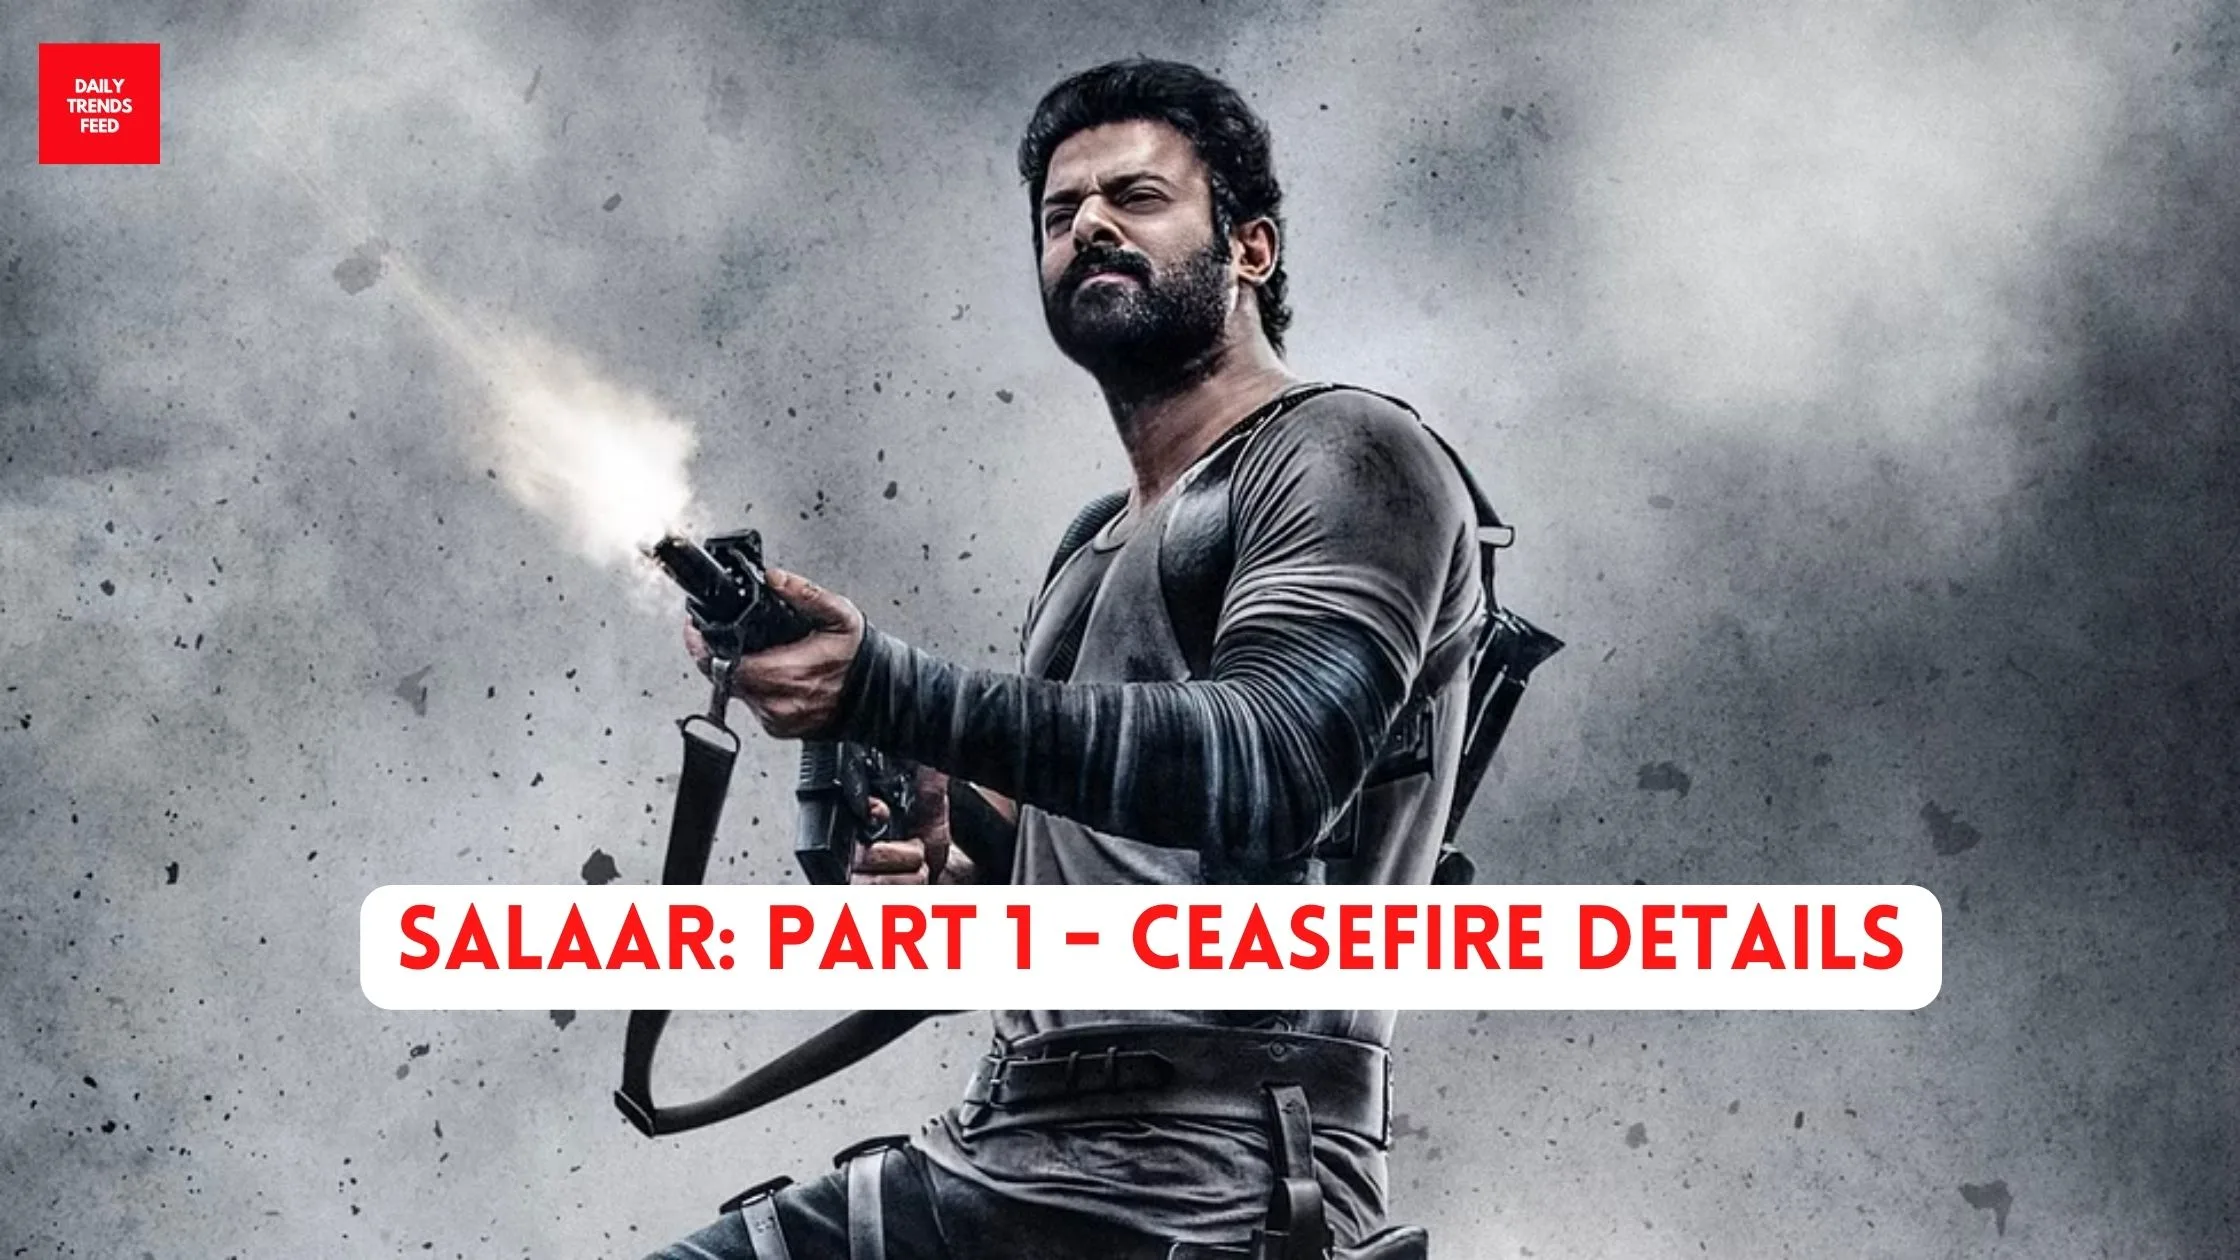 Salaar: Part 1 - Ceasefire Details: All Things To Know About Prashanth Neel - Prabhas Collaboration!